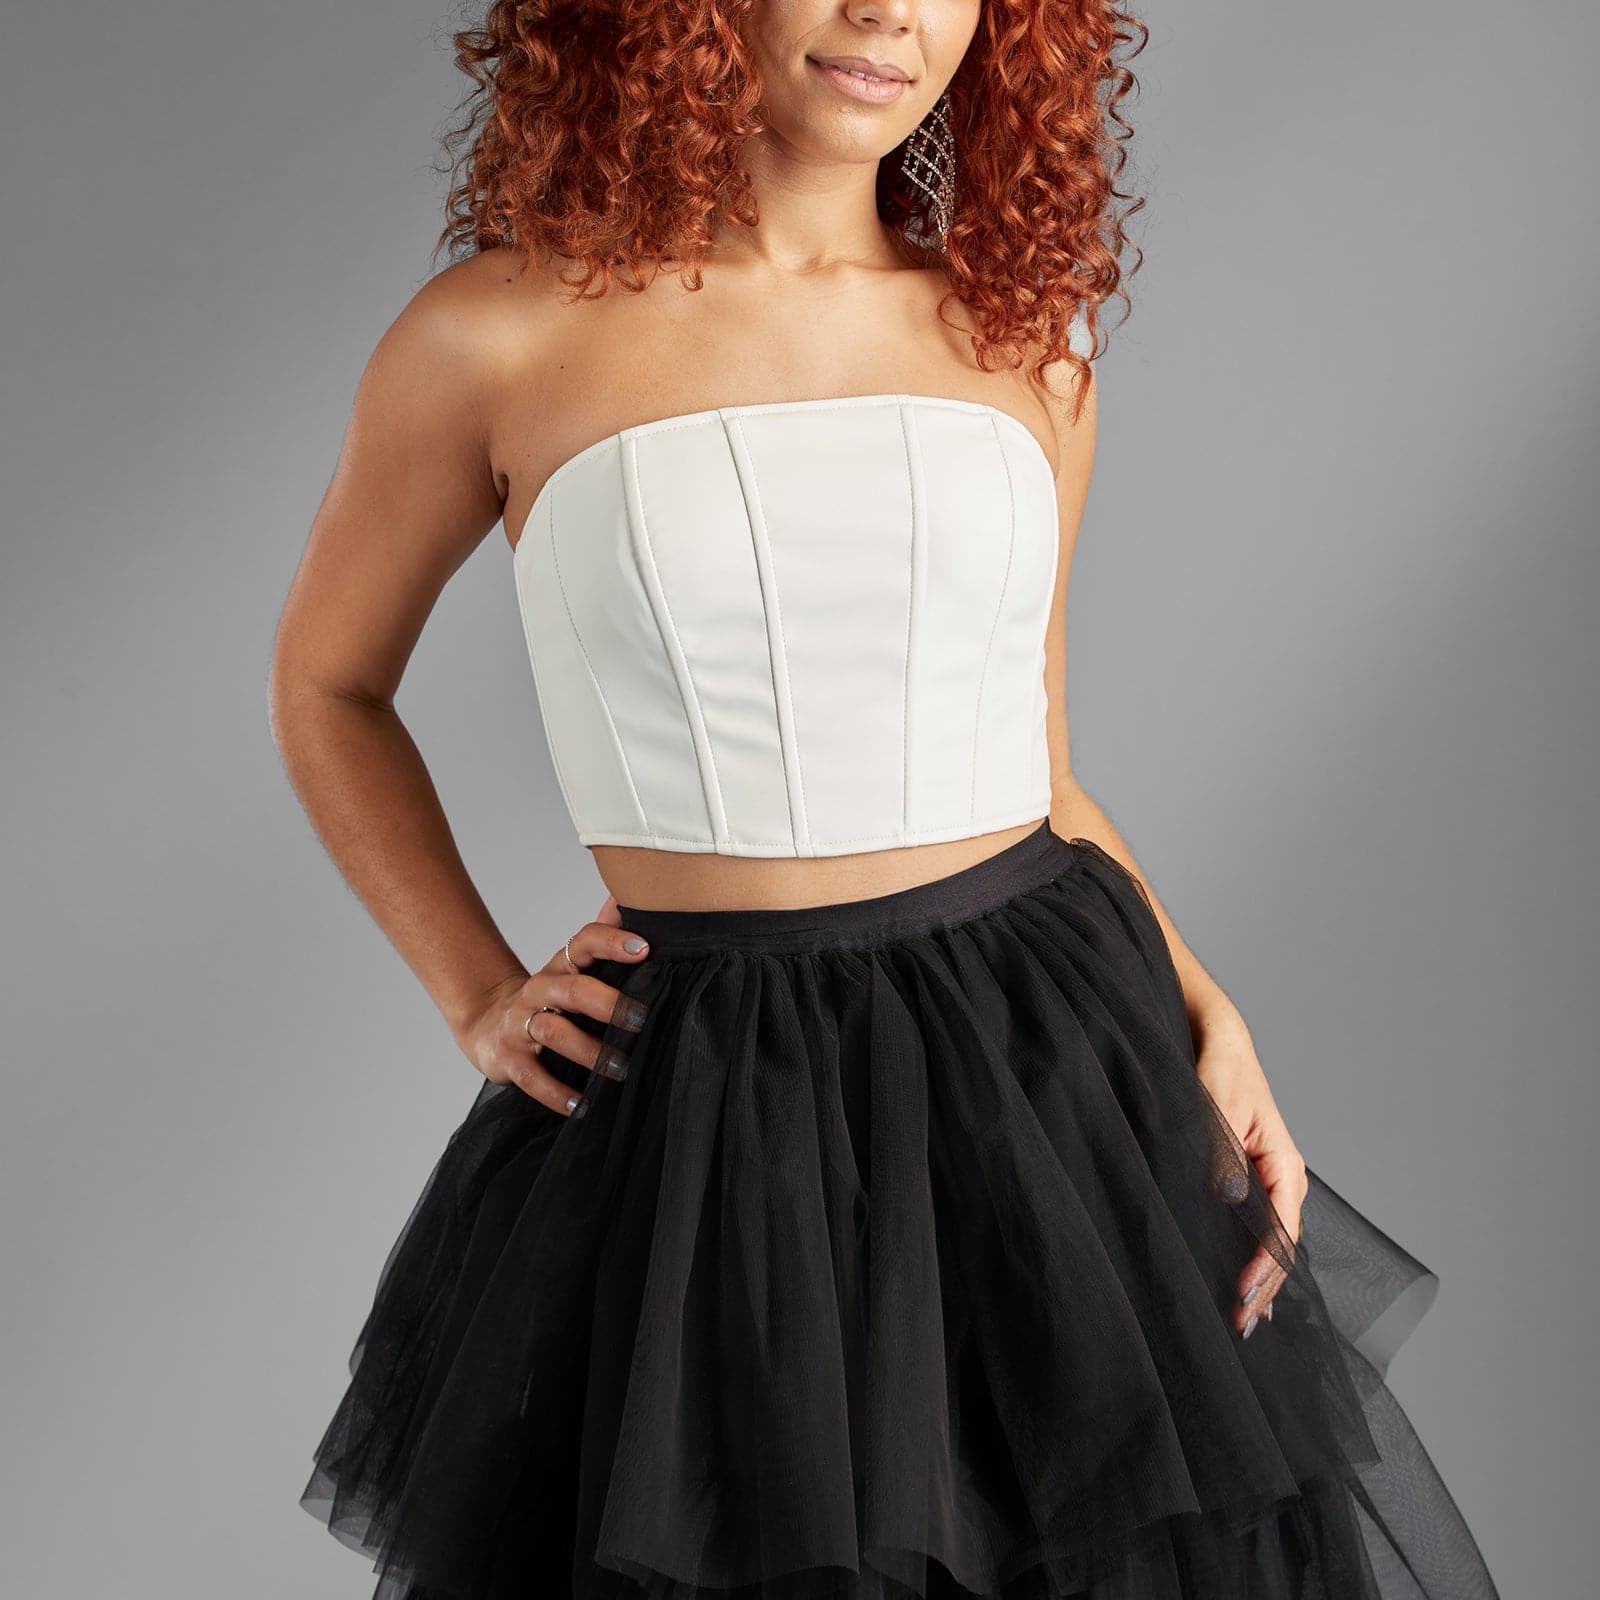 Versatile and trendy, this corset style top will be your go-to all season. Our White Sands is a form-fitting tube top with boning, is made of soft vegan leather material with a slight stretch and has a back zipper. Pair it with a fun and flirty skirt or your favorite pair of jeans. However you choose, it’s a statement style you’ll love to wear again and again - Avah Couture